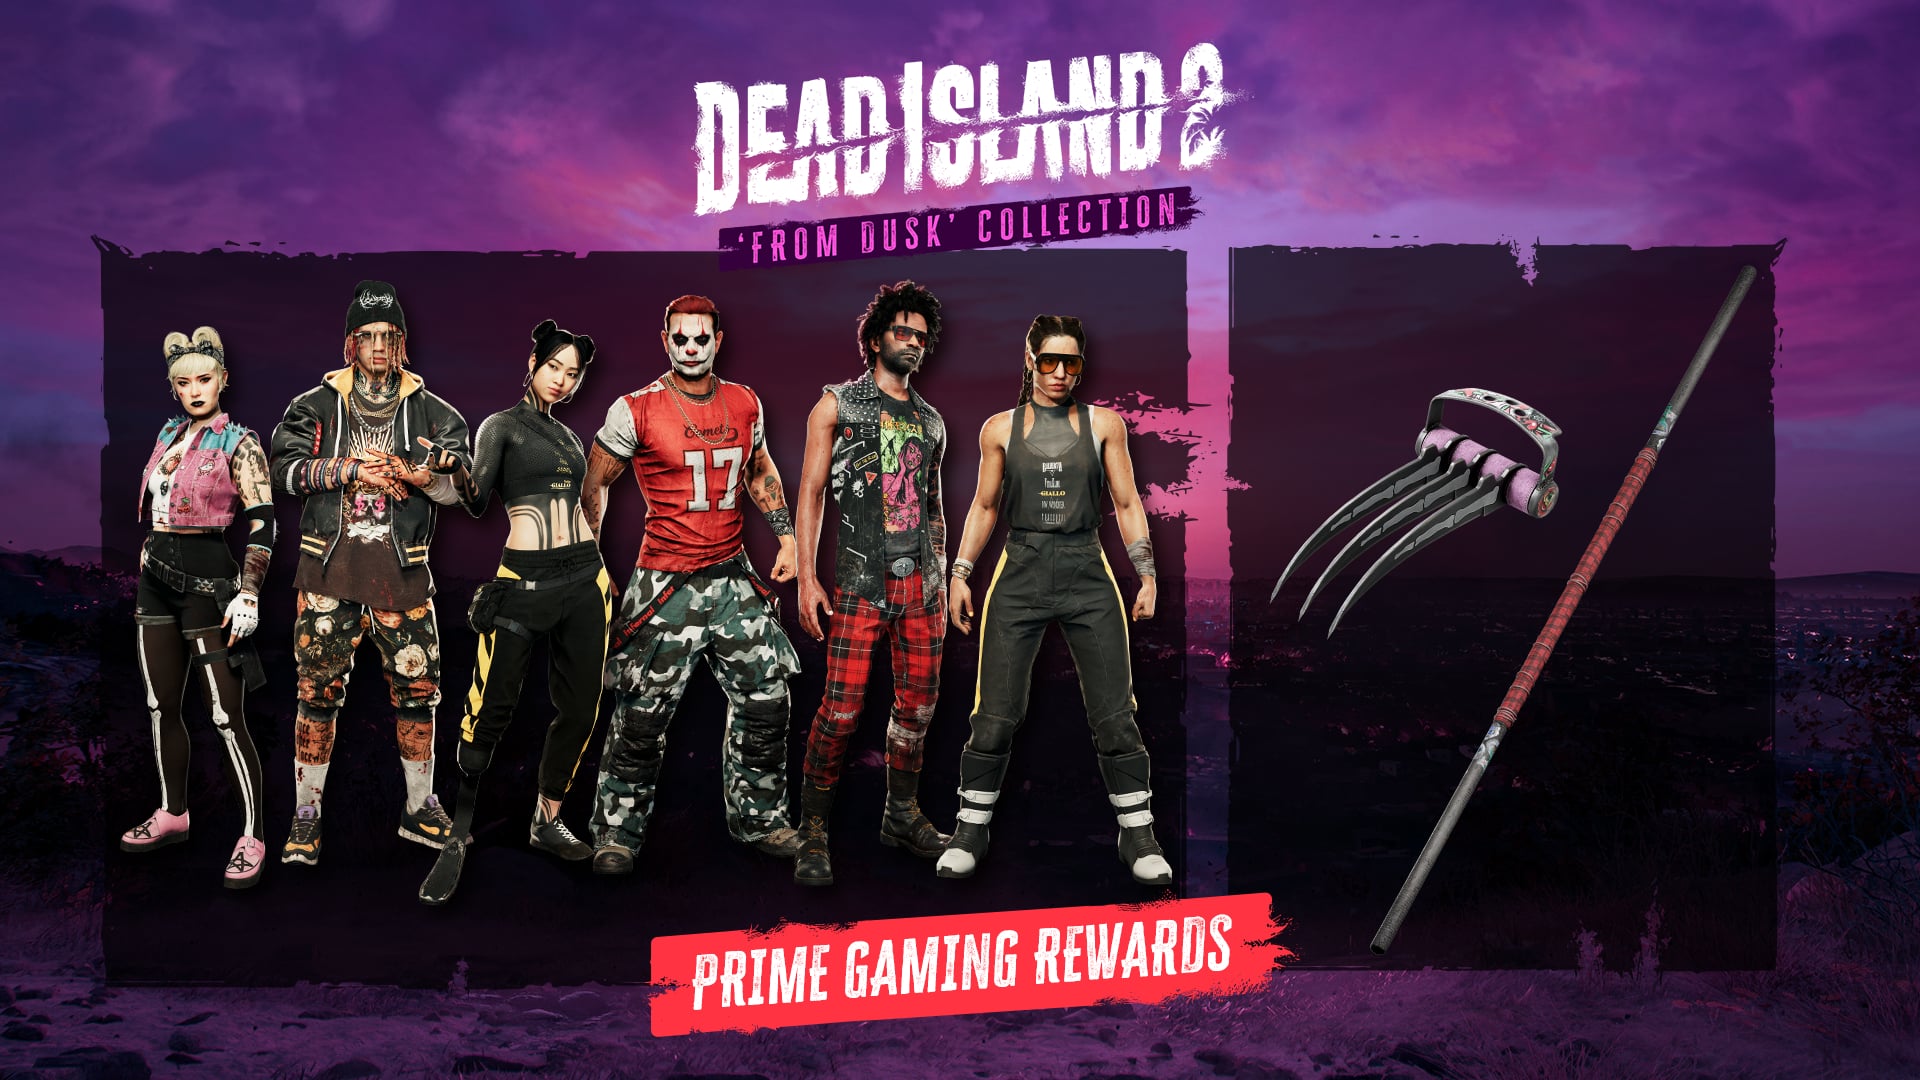 From Dusk Dead Island 2  Amazon Prime Gaming Skins